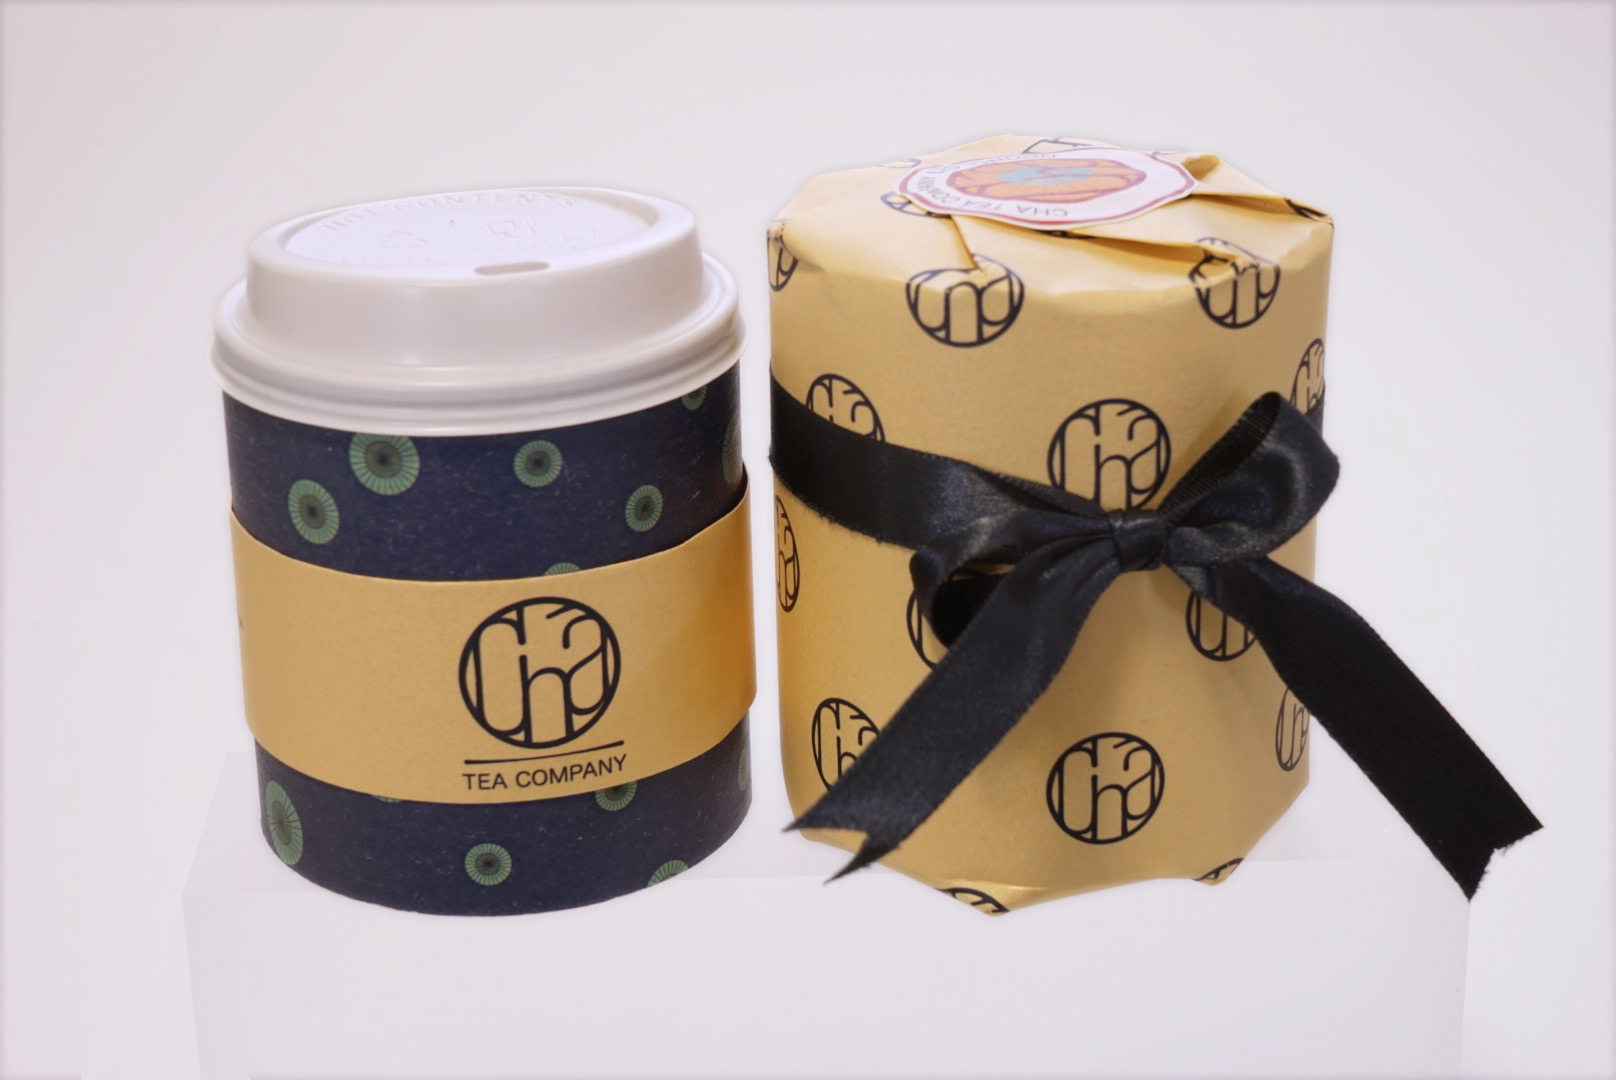 Take away cup design and tea packaging